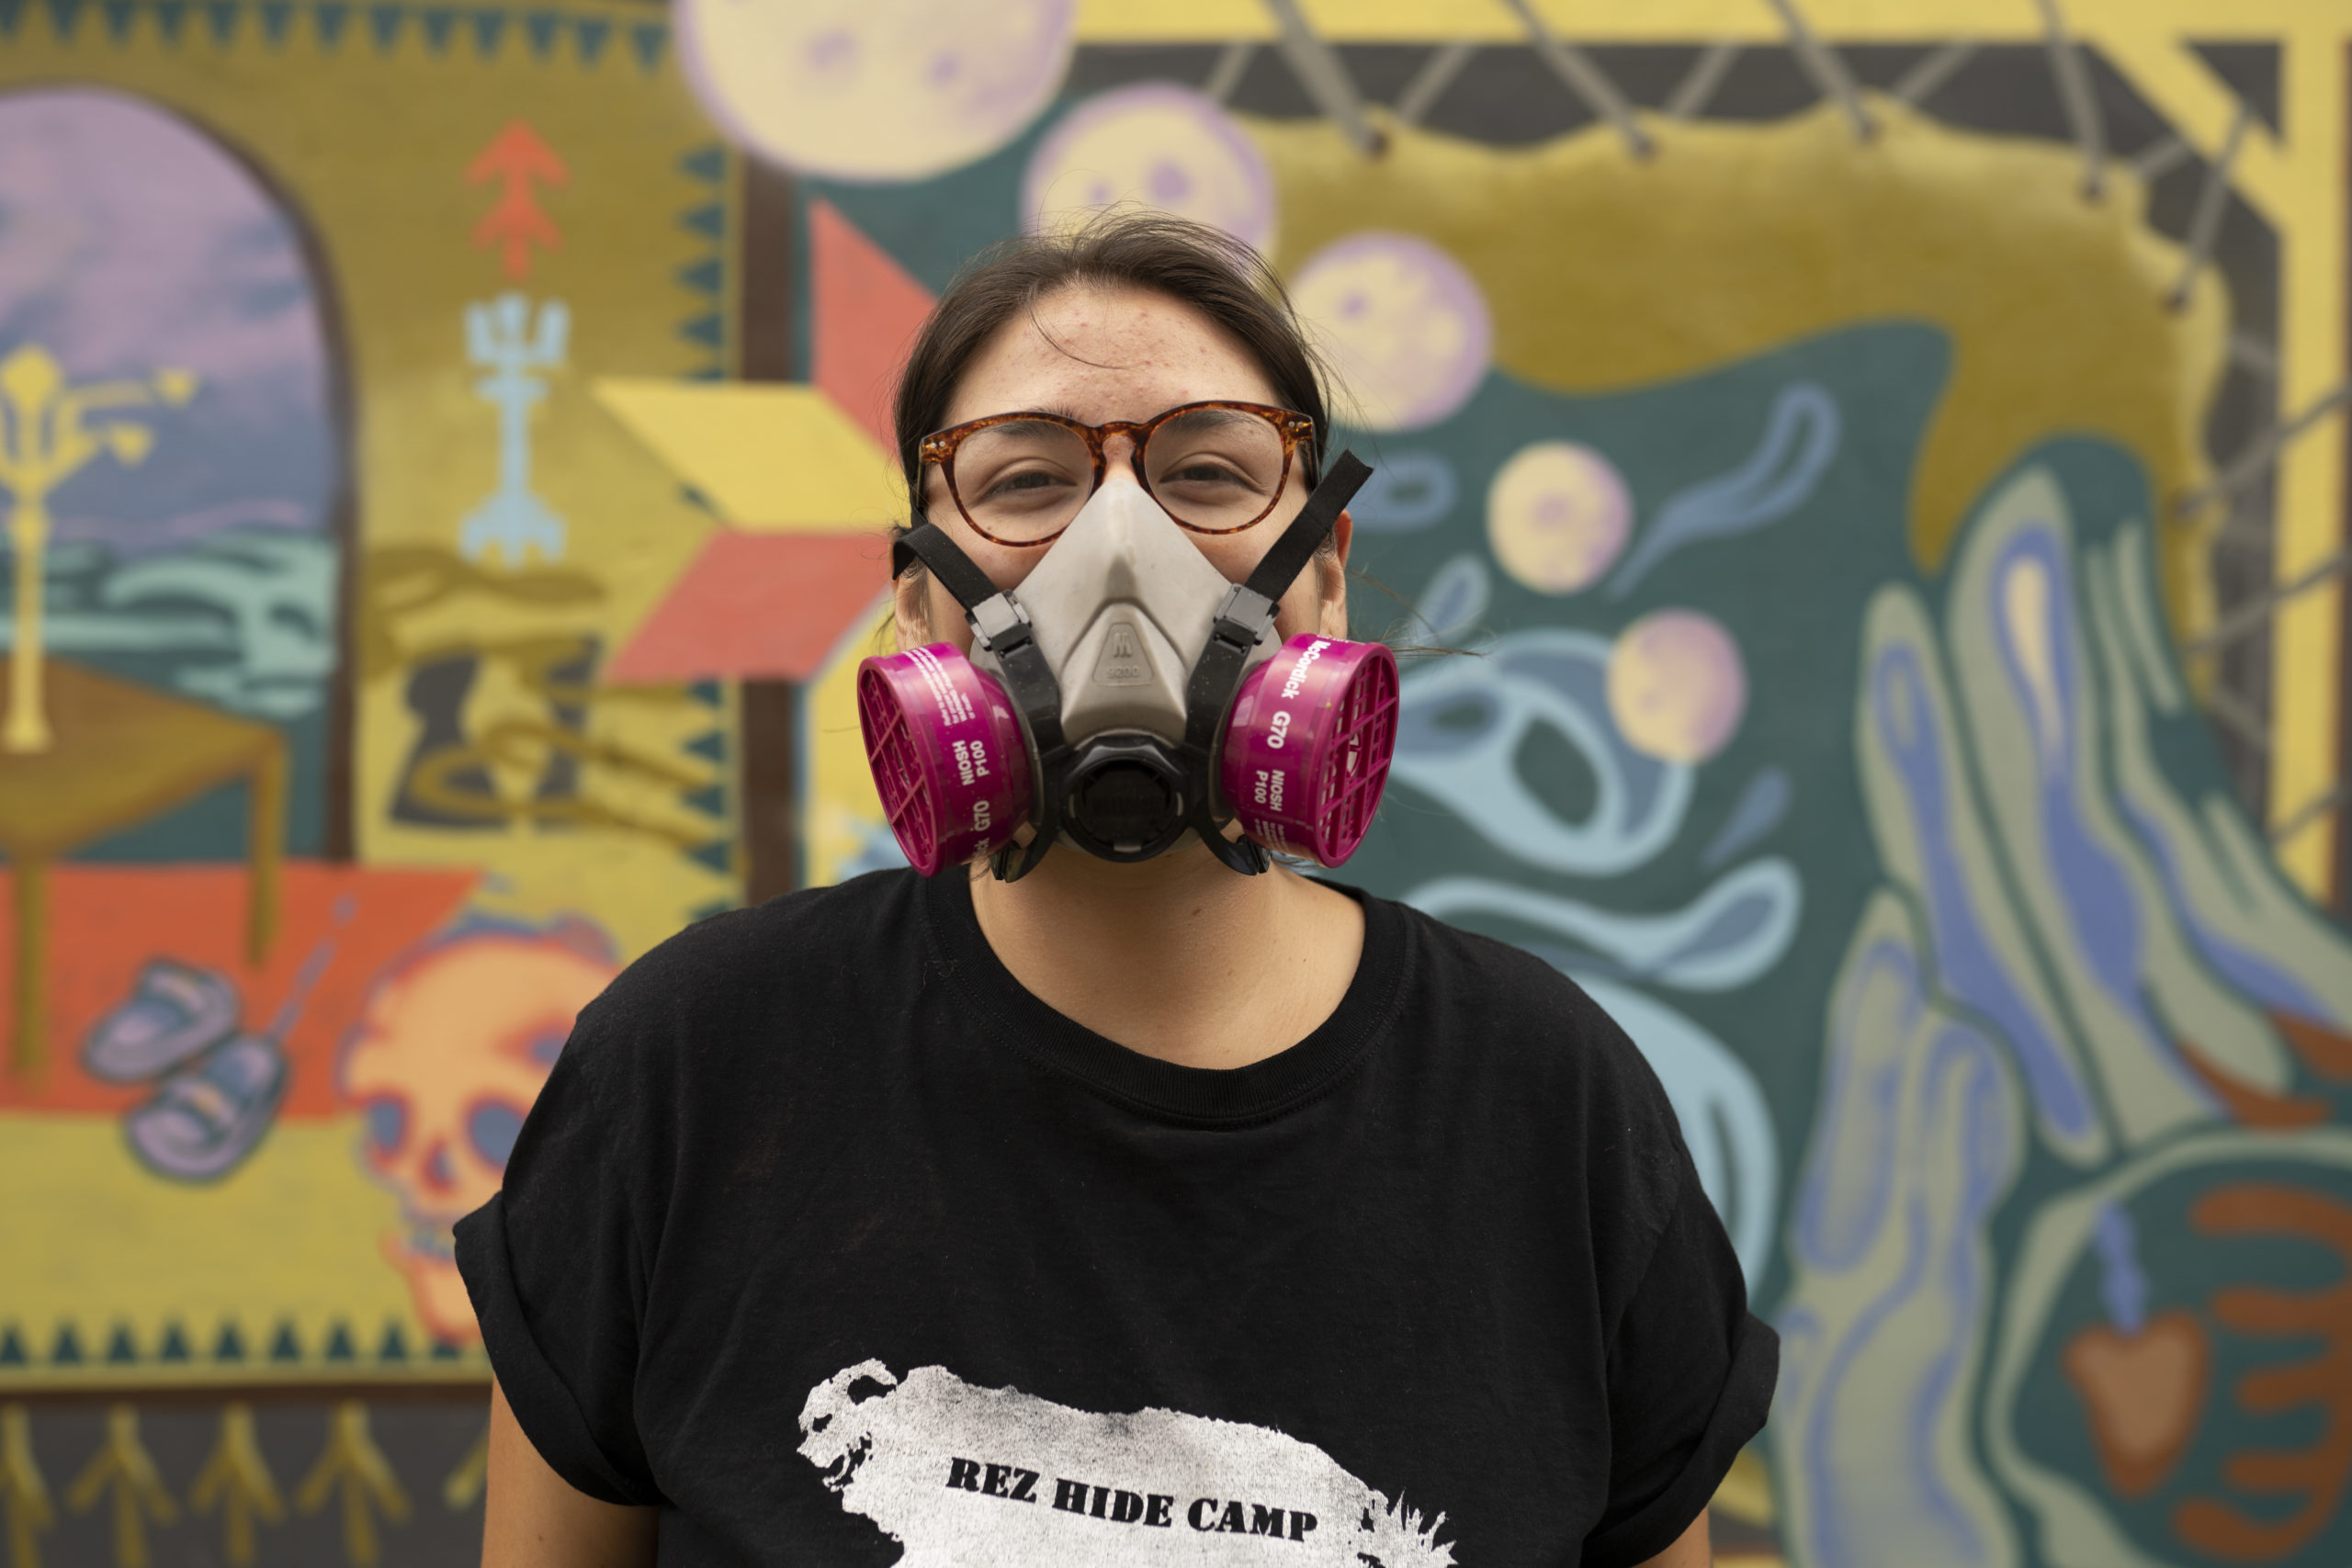 Artist Shelby Gagnon looking at camera, smiling with a spray paint mask on and a graphic tee that reads "REZ HIDE CAMP". She is standing in front of her first mural with colours of yellow ochre, purple, teal and orange.